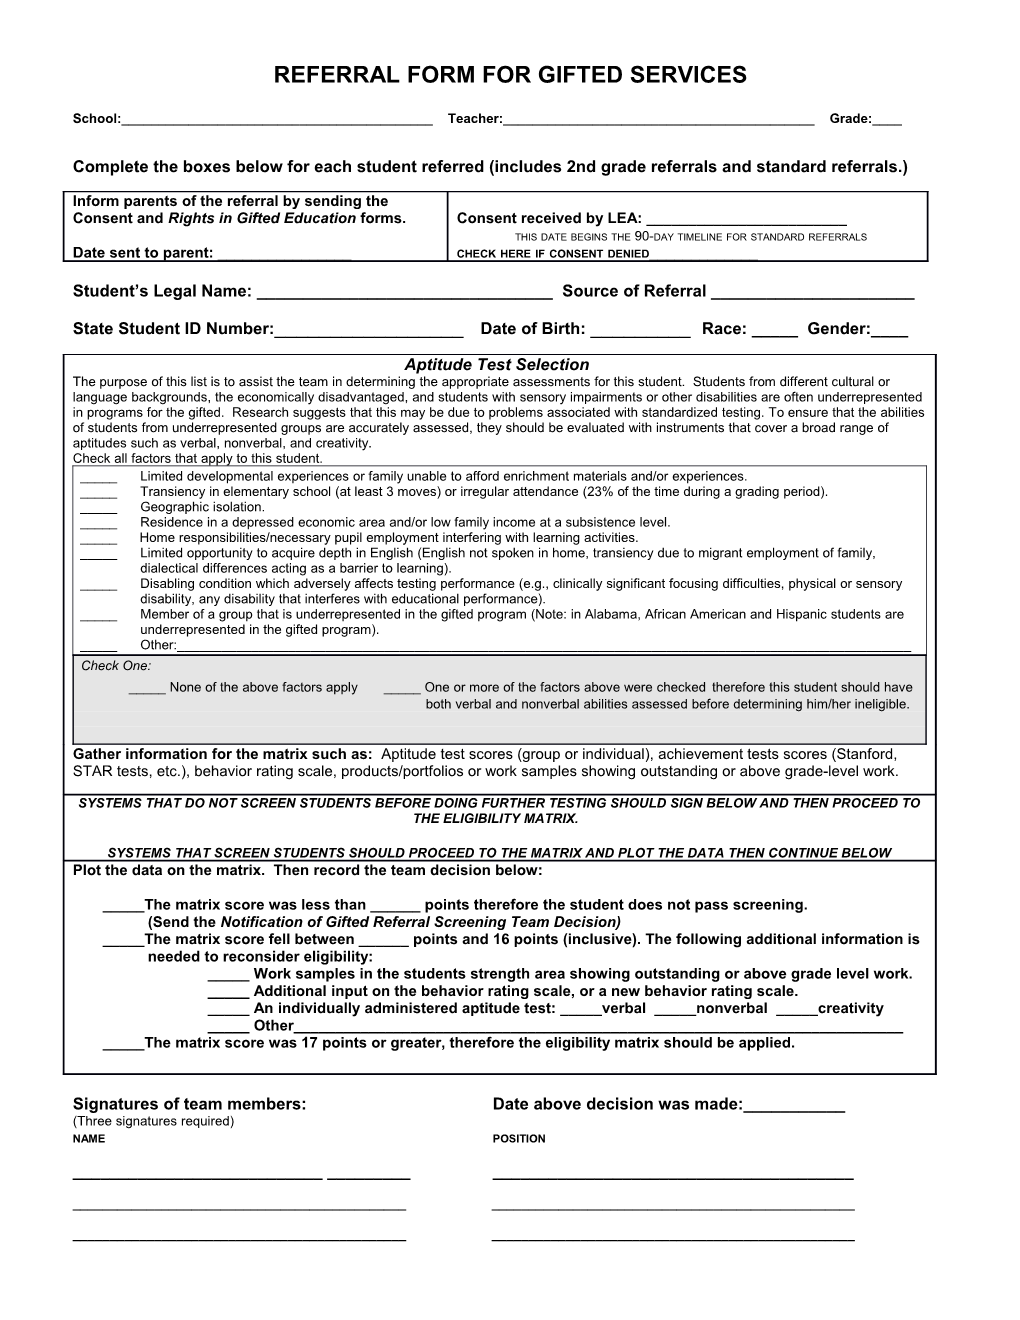 Referral Form for Gifted Services